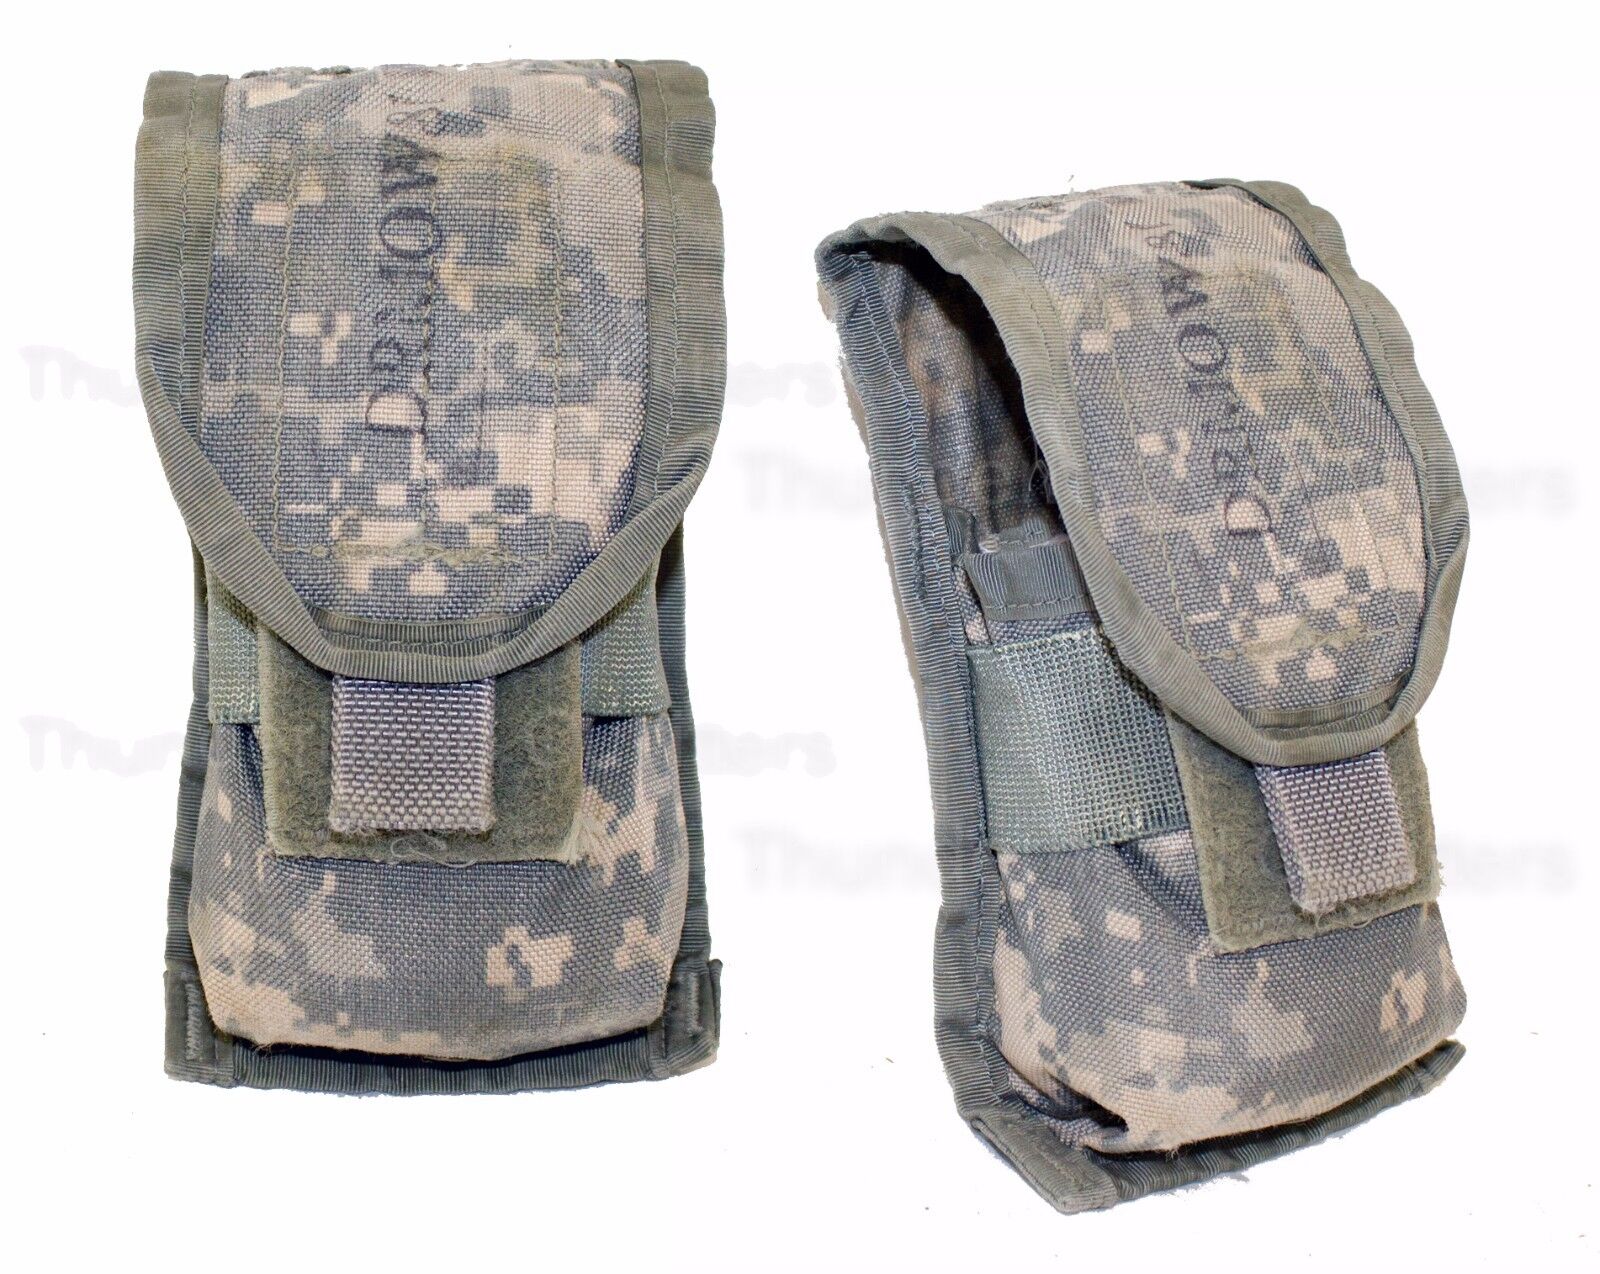 SET OF 2 - US Army ACU DOUBLE MAG POUCH Ammo Magazine Utility MOLLE USGI VGC US Military Contractor W911QY-06-D-0003-0001